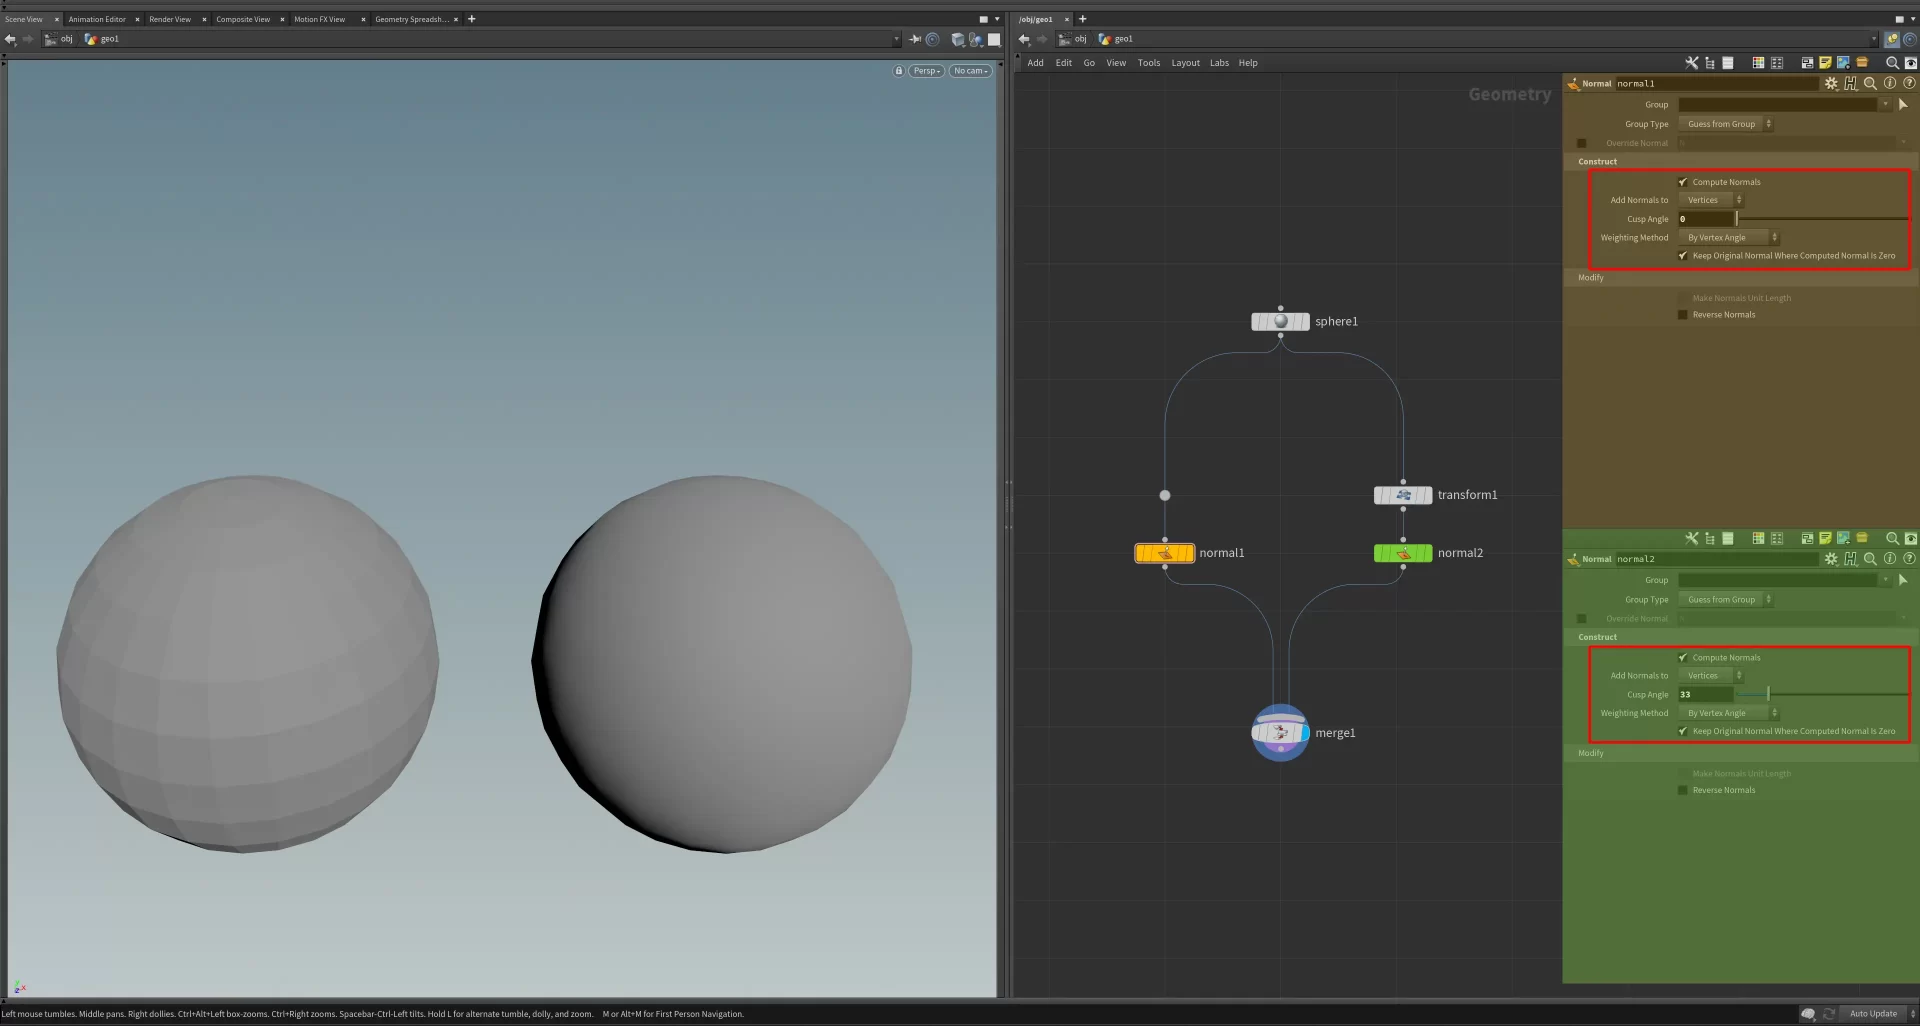 The difference between hard and soft normals for shading